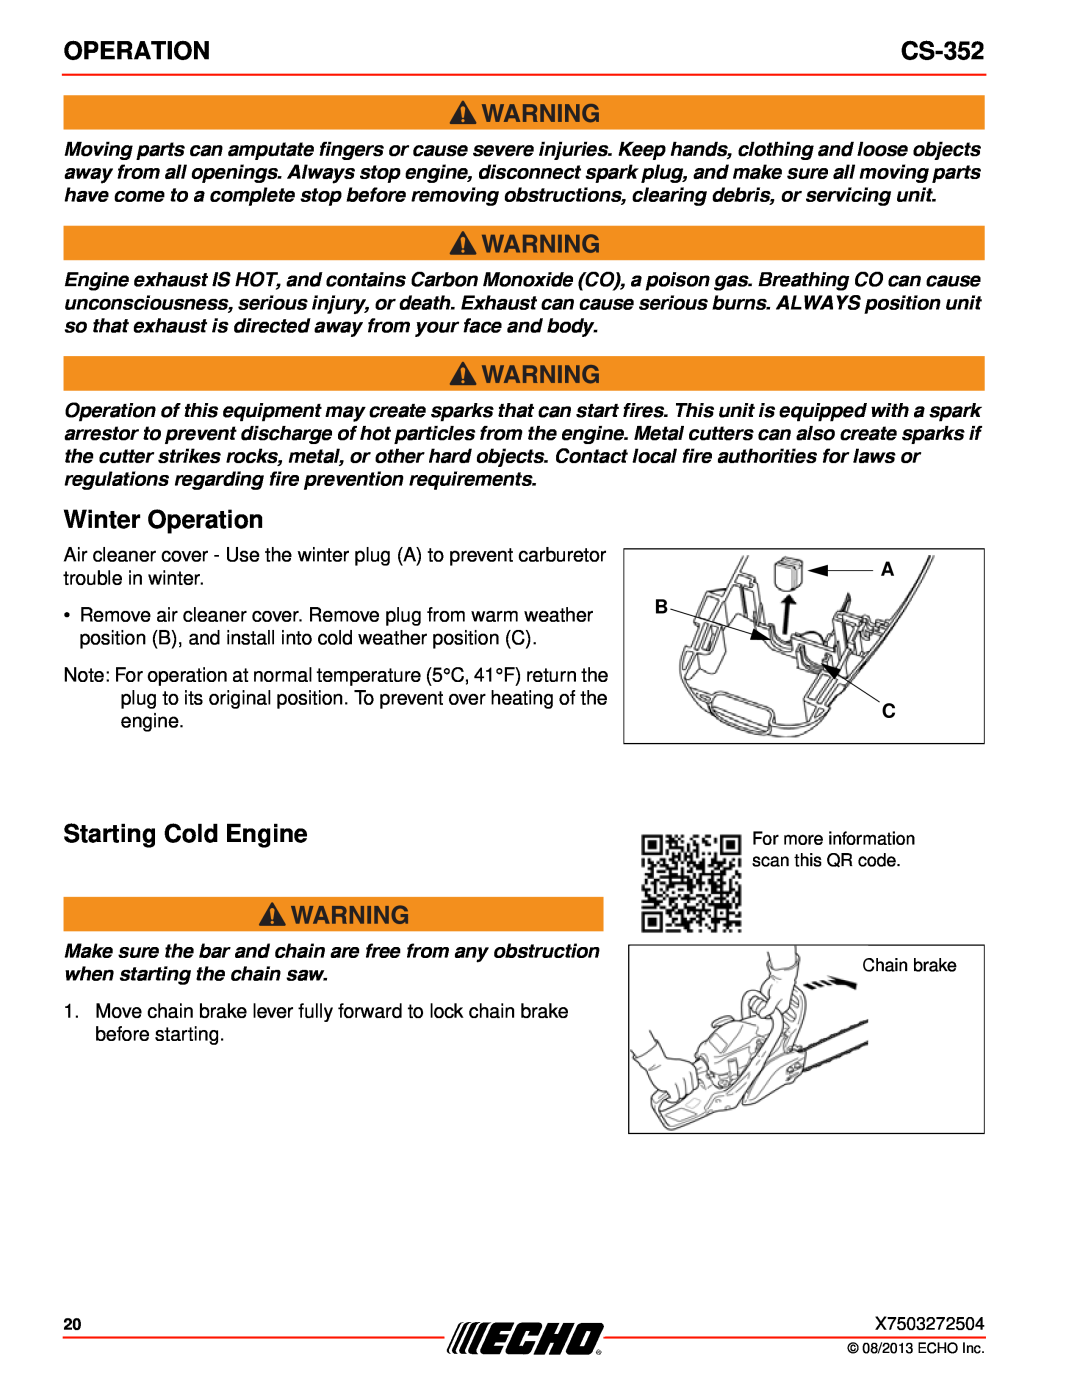 Echo CS-352 instruction manual Winter Operation, Starting Cold Engine, For more information scan this QR code Chain brake 